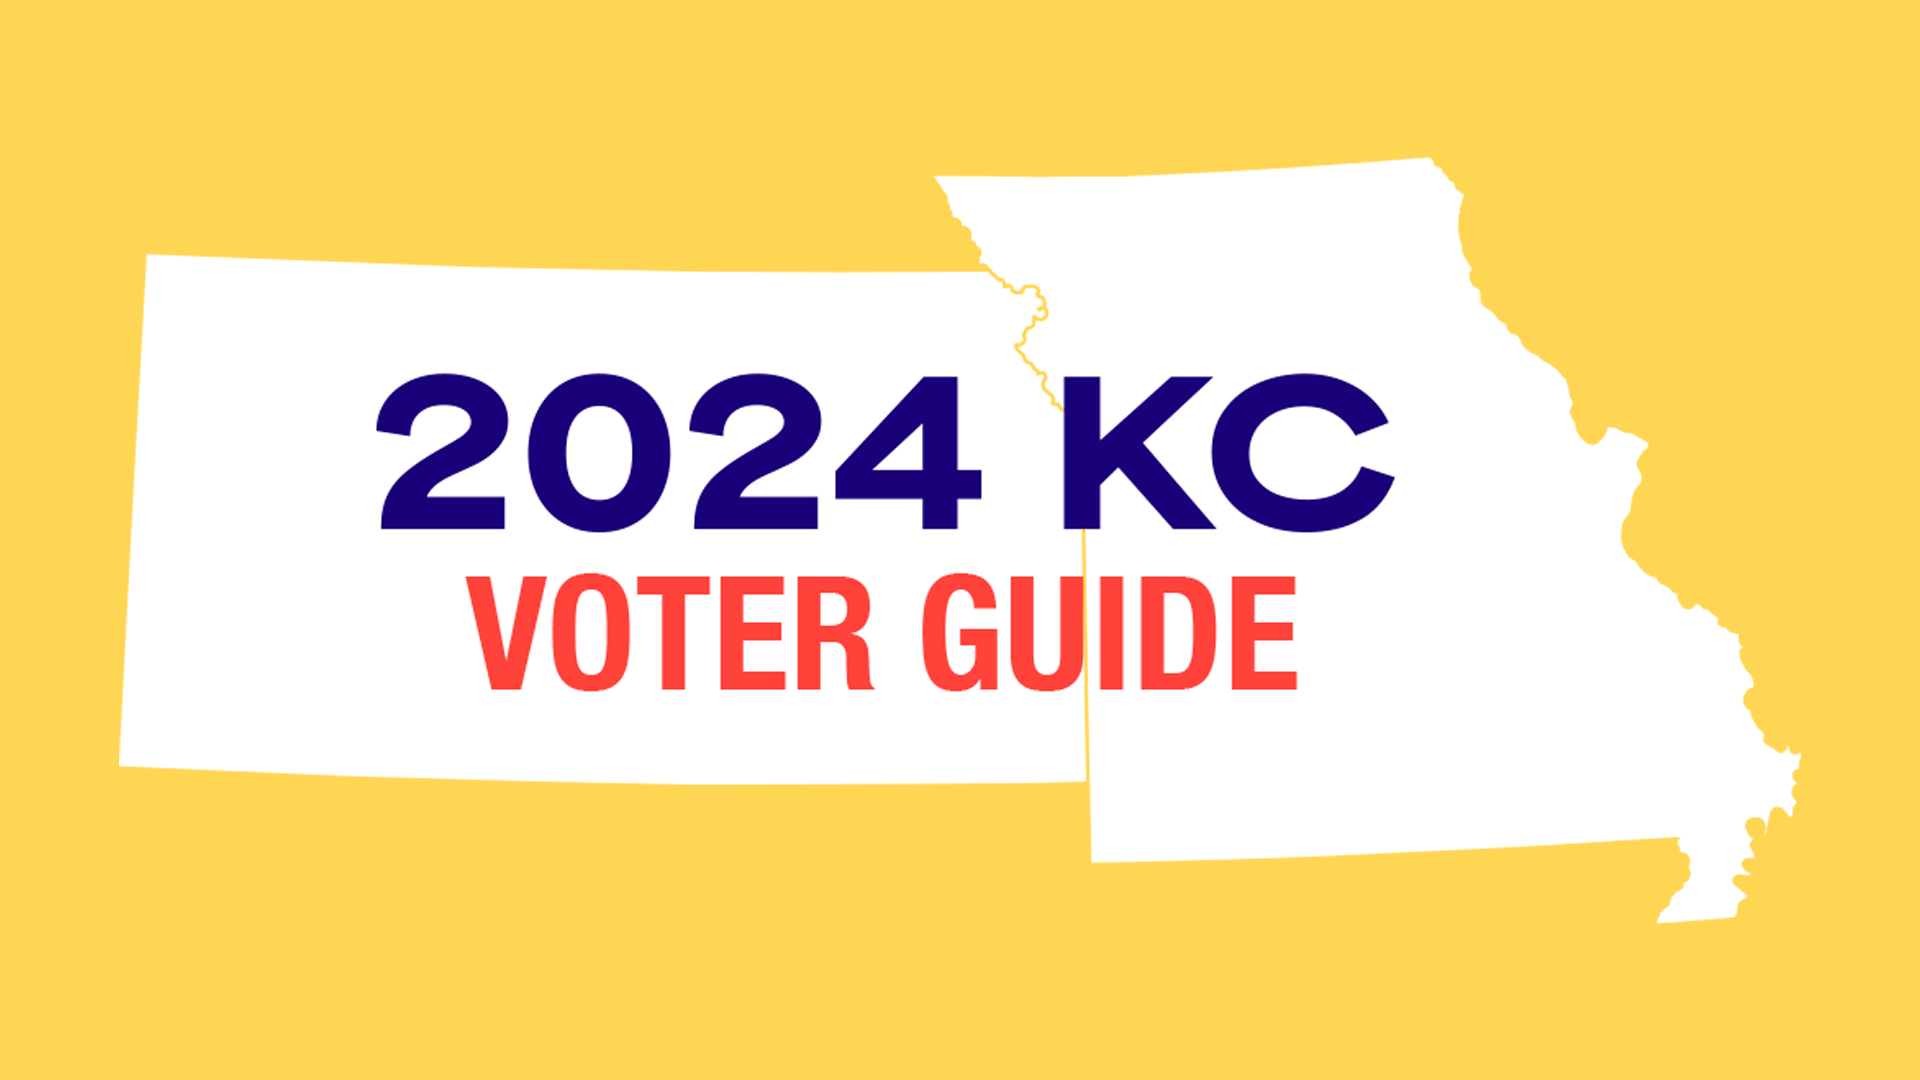 2024 KC Voter Guide - KS and MO state shapes on yellow background